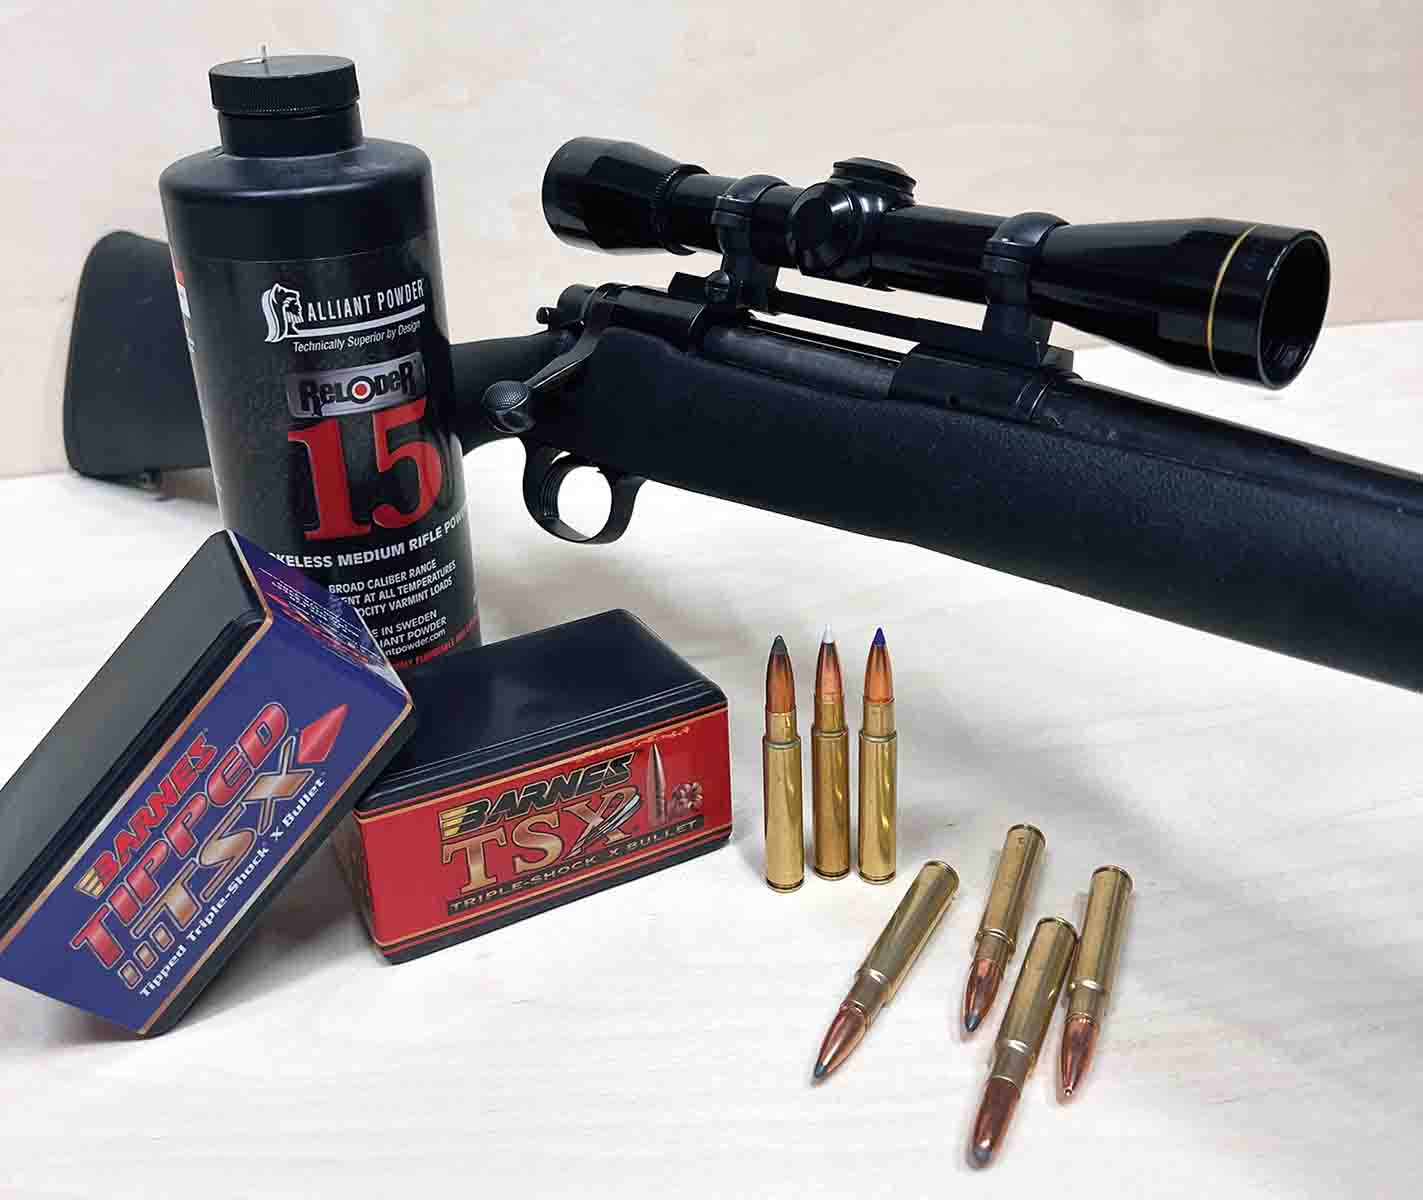 The Remington 700 ADL performed well overall with a wide range of bullets used for testing. A few hunting favorites are shown here.